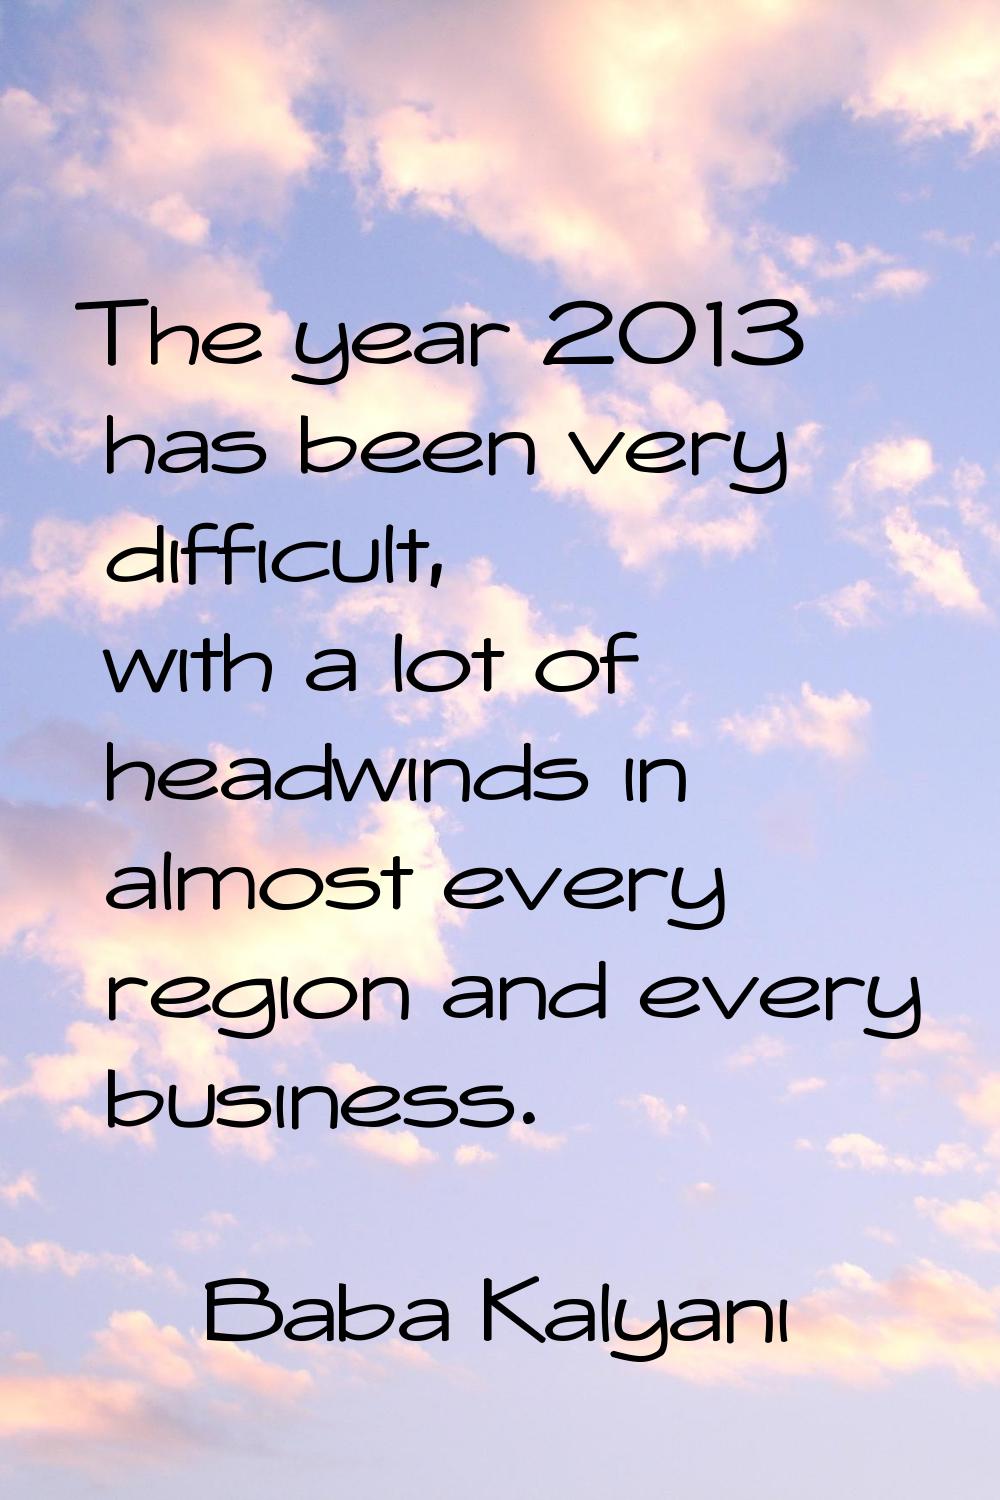 The year 2013 has been very difficult, with a lot of headwinds in almost every region and every bus